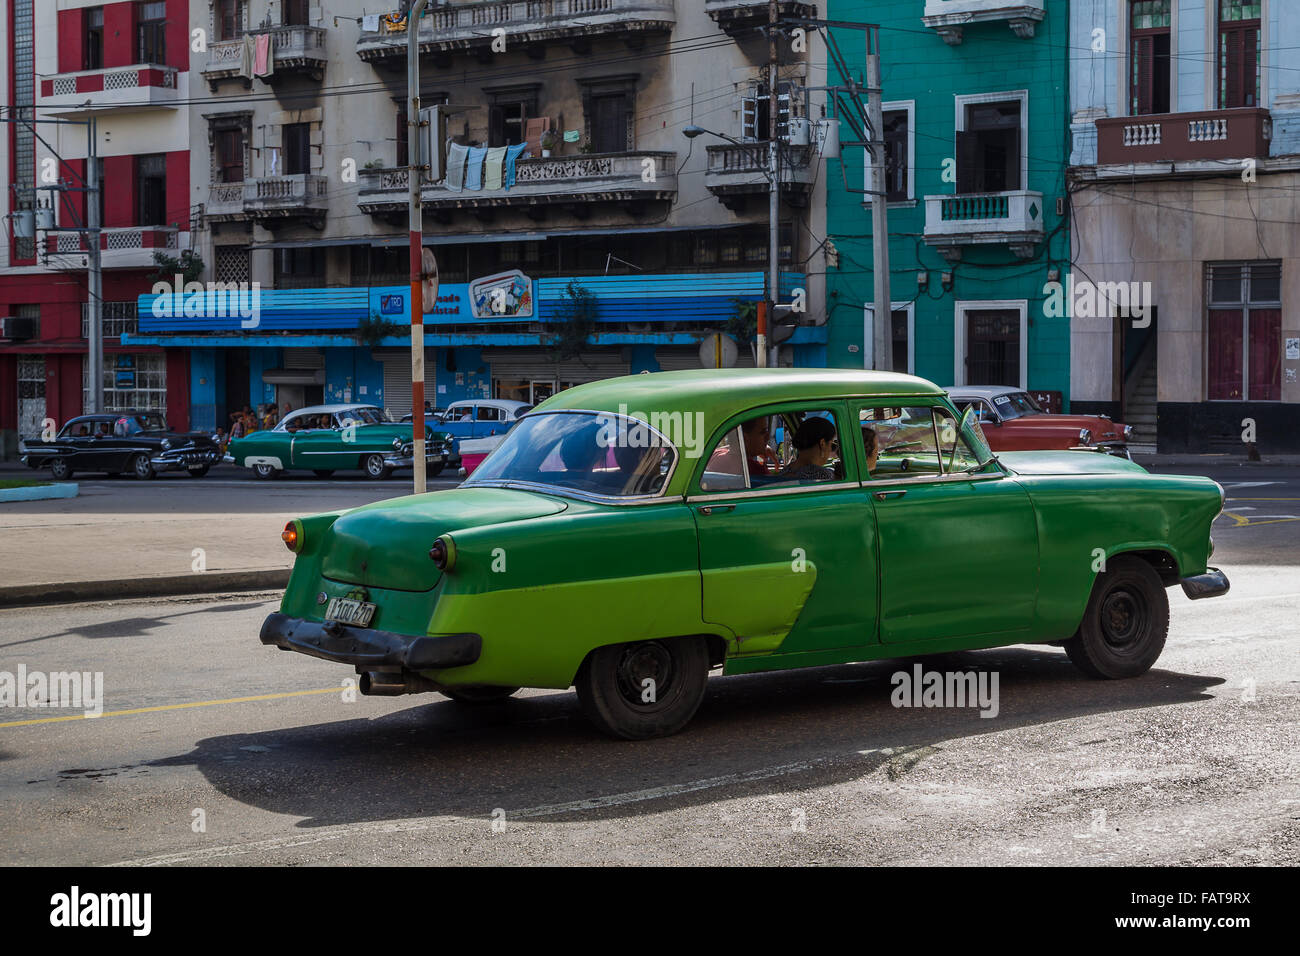 A vintage car in two shades of green prepares to pull out onto Calle San Lazaro as half a dozen other old timers wait. Stock Photo